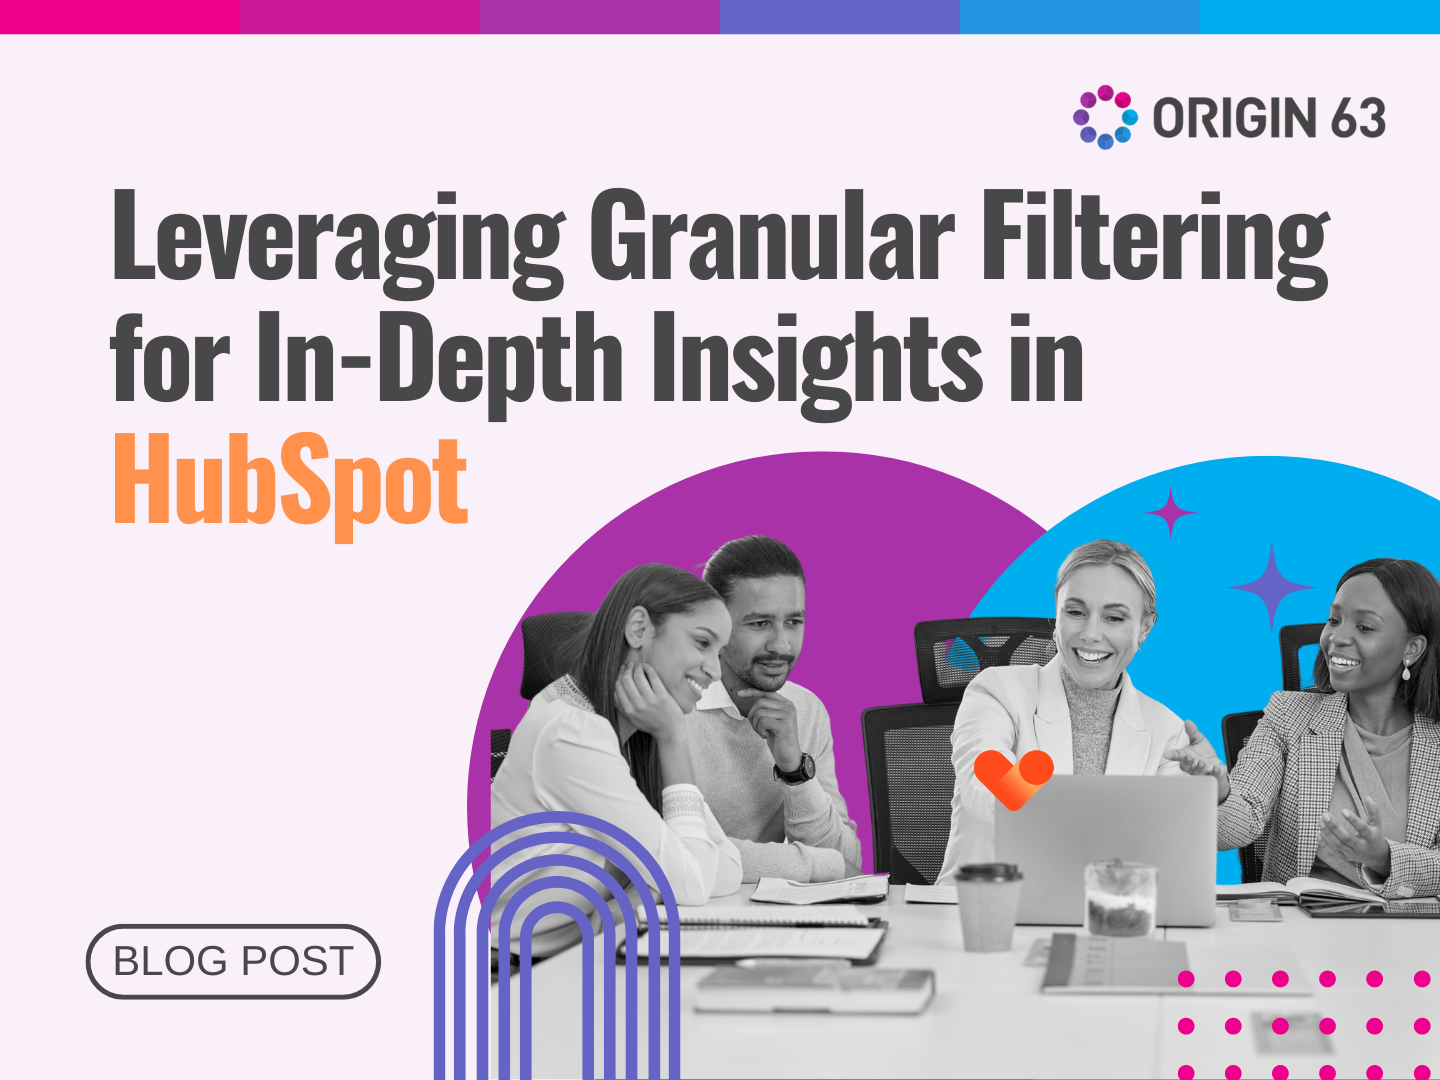 Gain granular visibility into ticket metrics, SLAs, and team efficiency with HubSpot's advanced filtering for deeper service analytics.